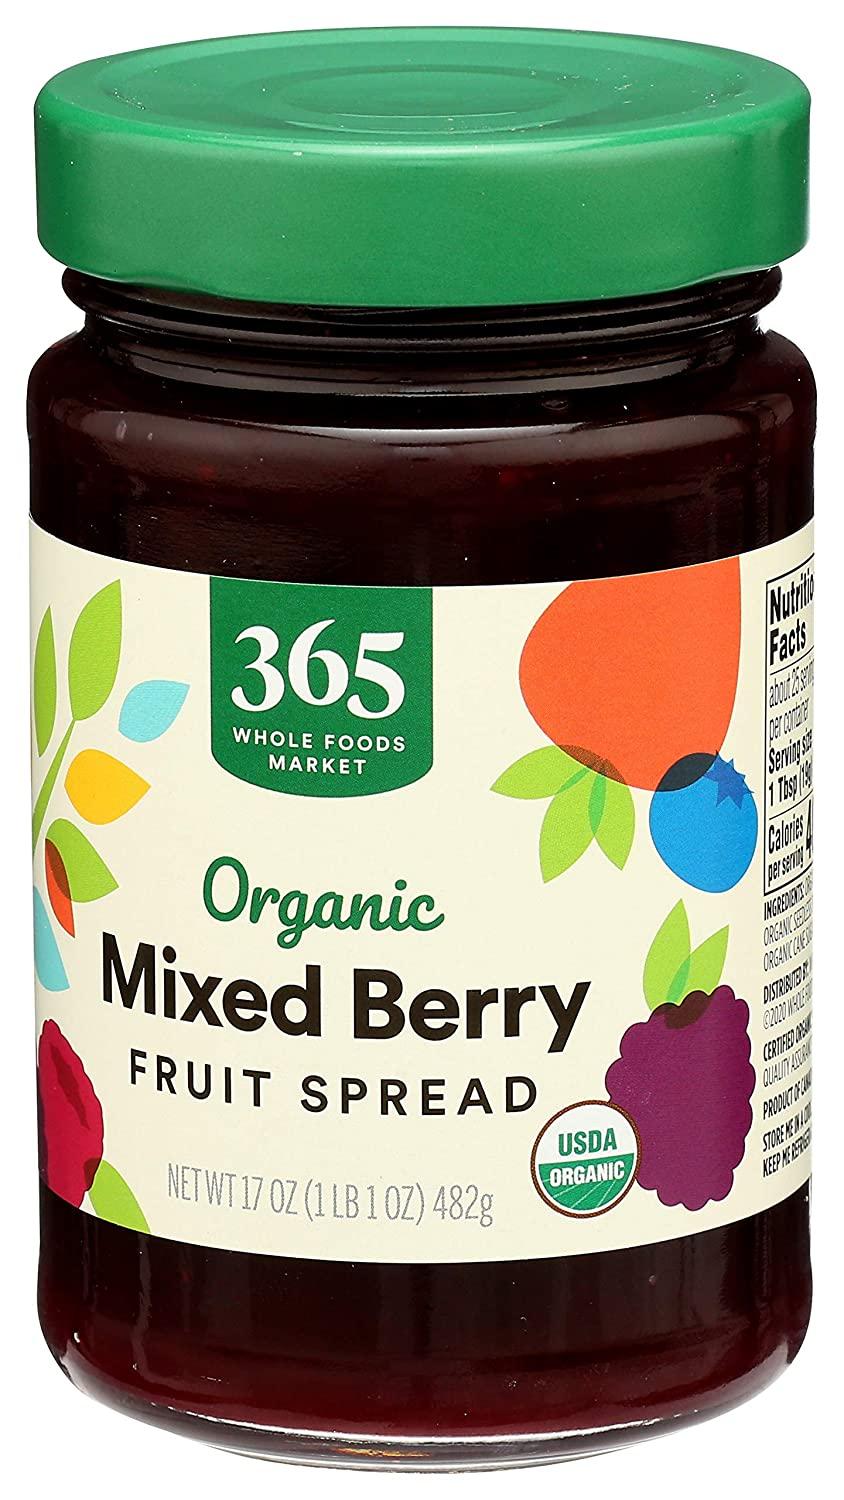 Whole Foods 365 Products Now Available on